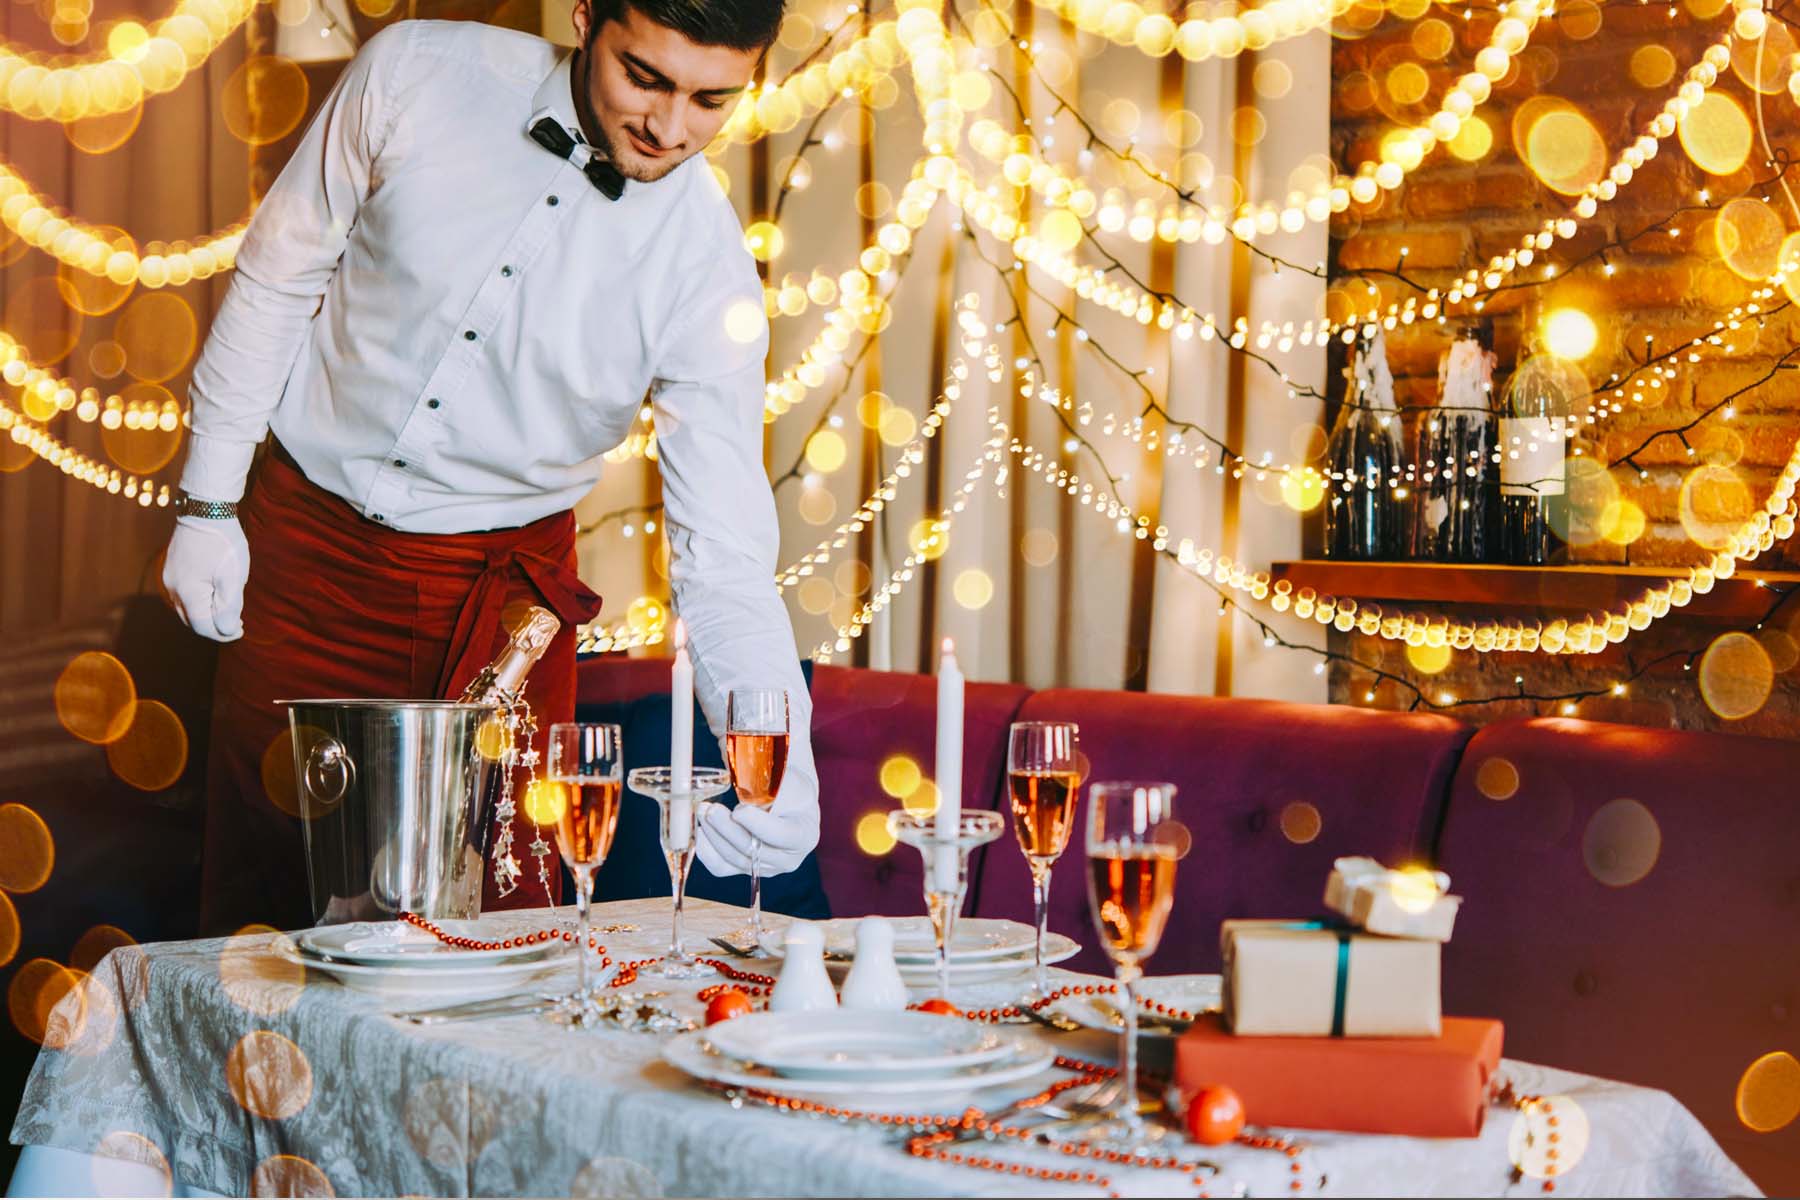 waiter setting filled champagne glasses on the table at a restaurant decorated for the holiday season